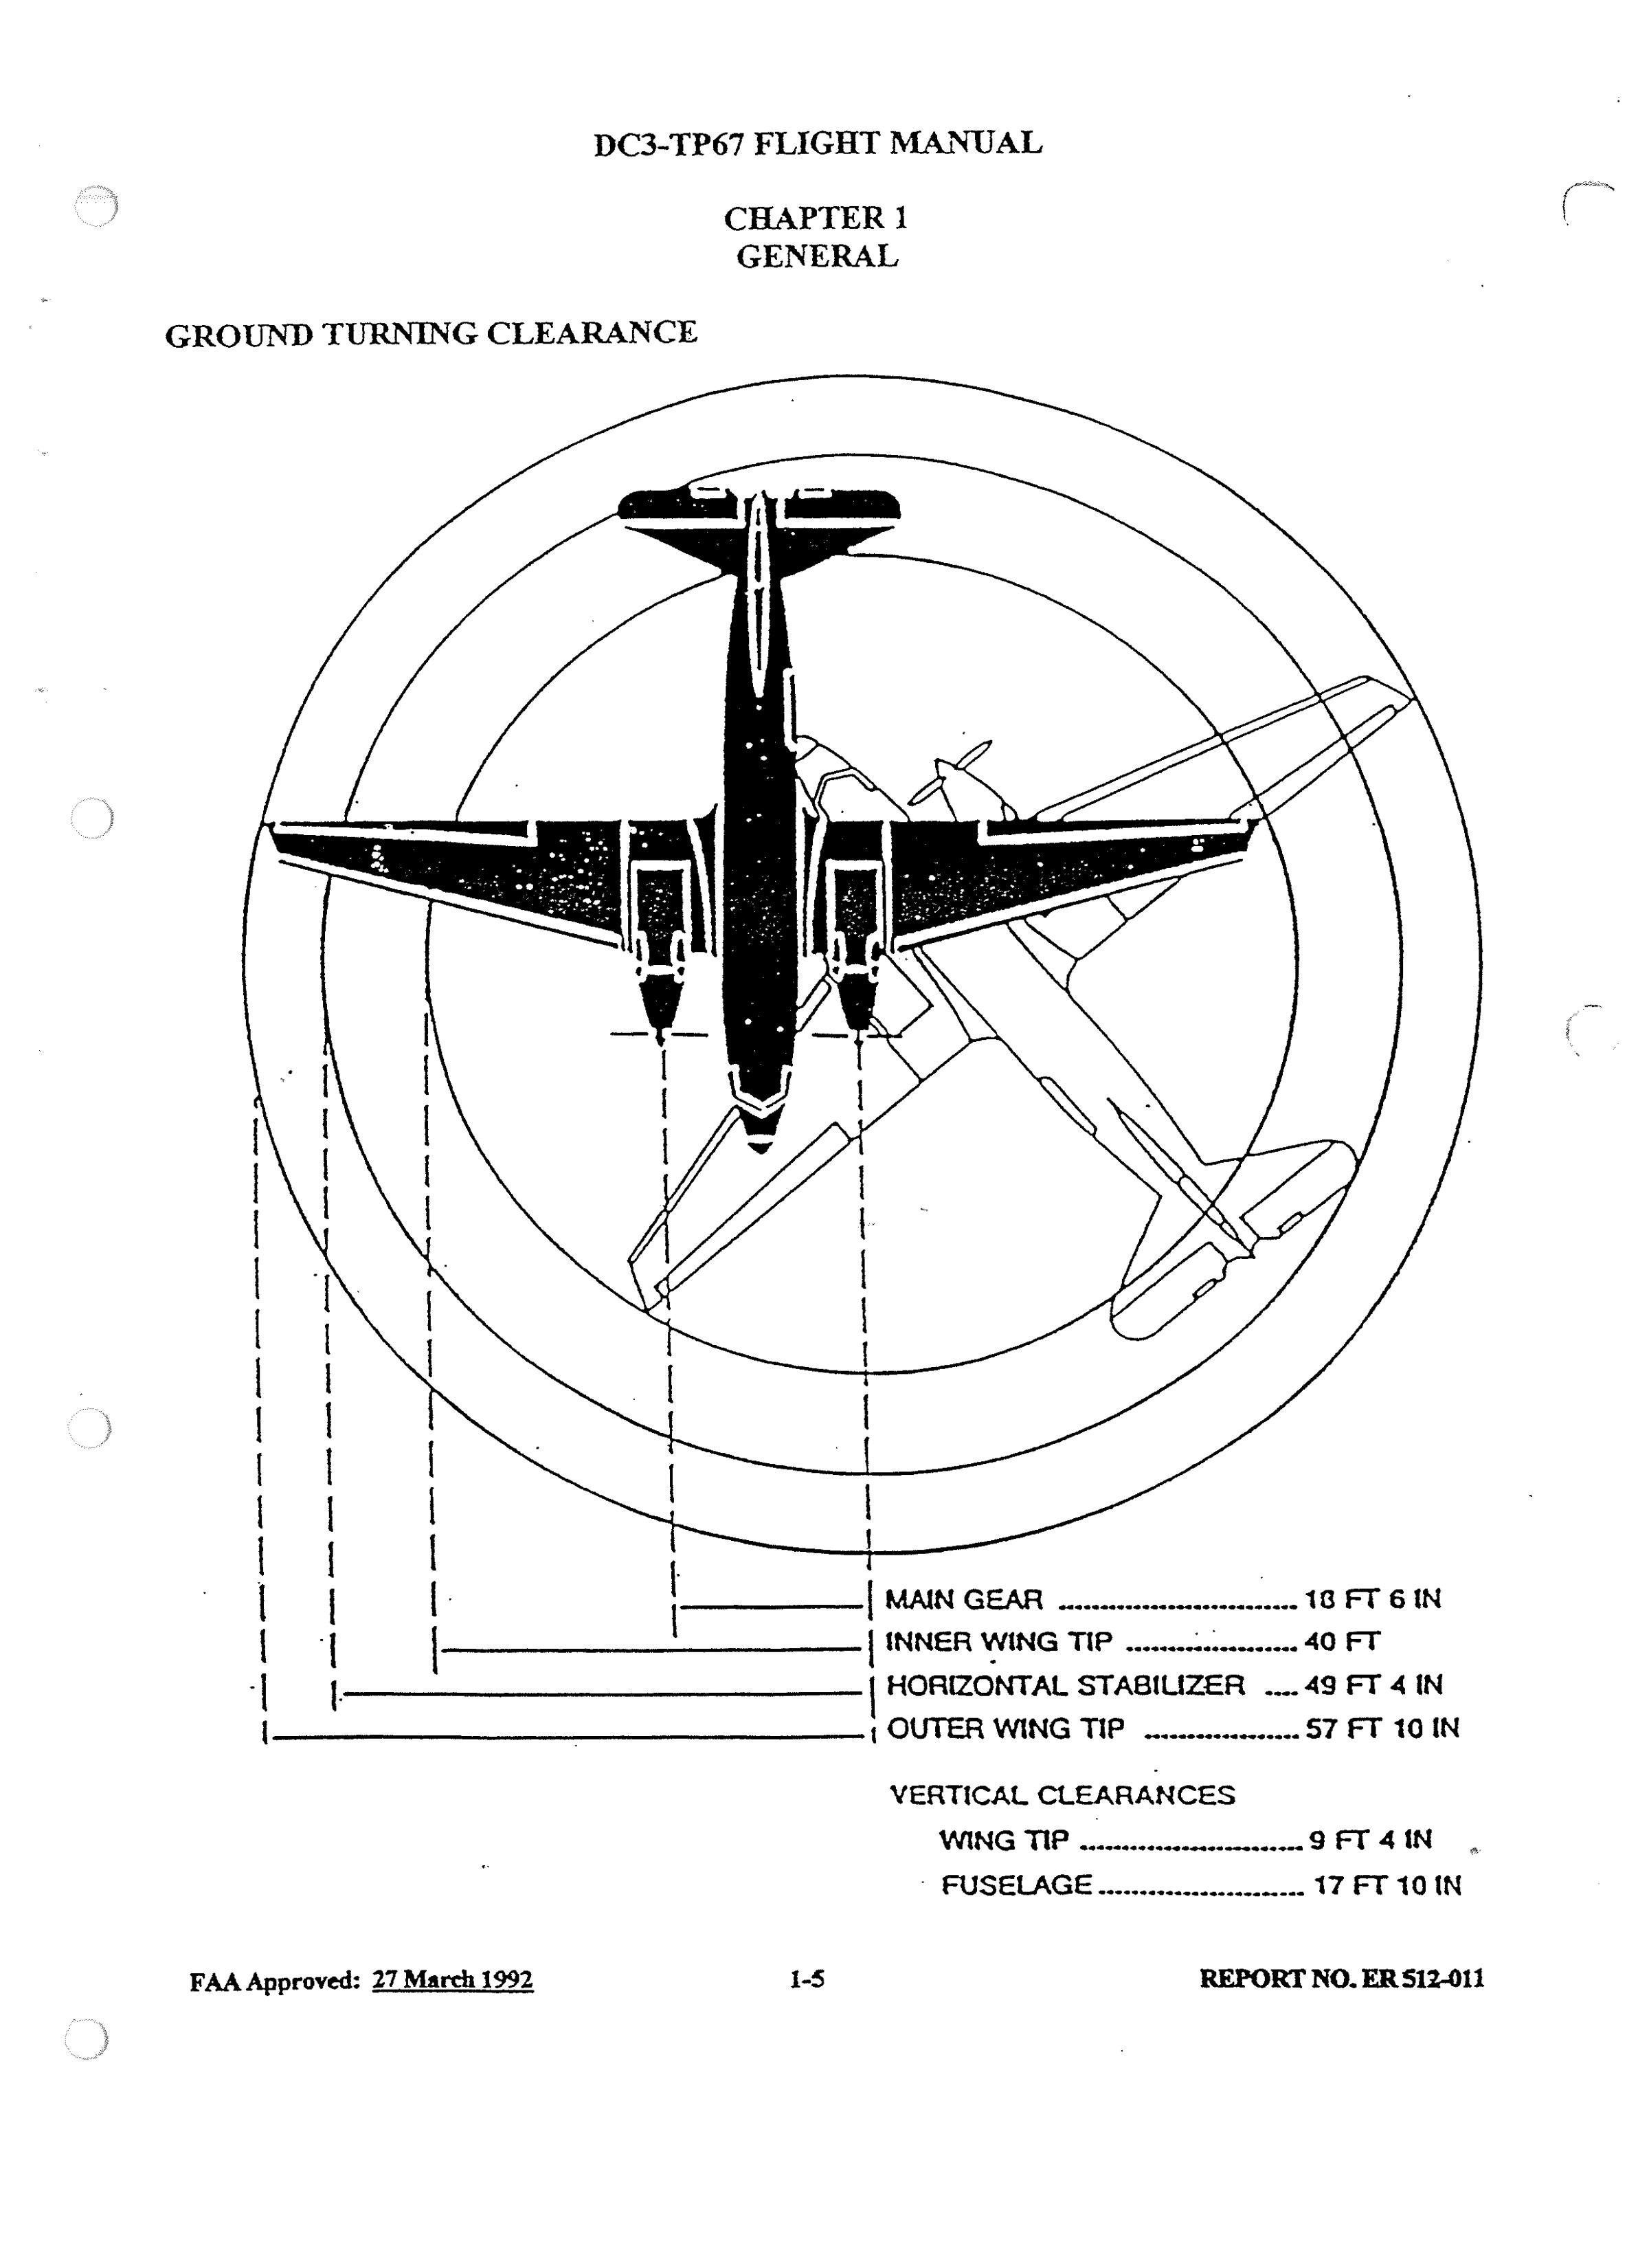 Sample page 13 from AirCorps Library document: Basler Turbo Conversions Flight Manual for Turbo DC3-TP67